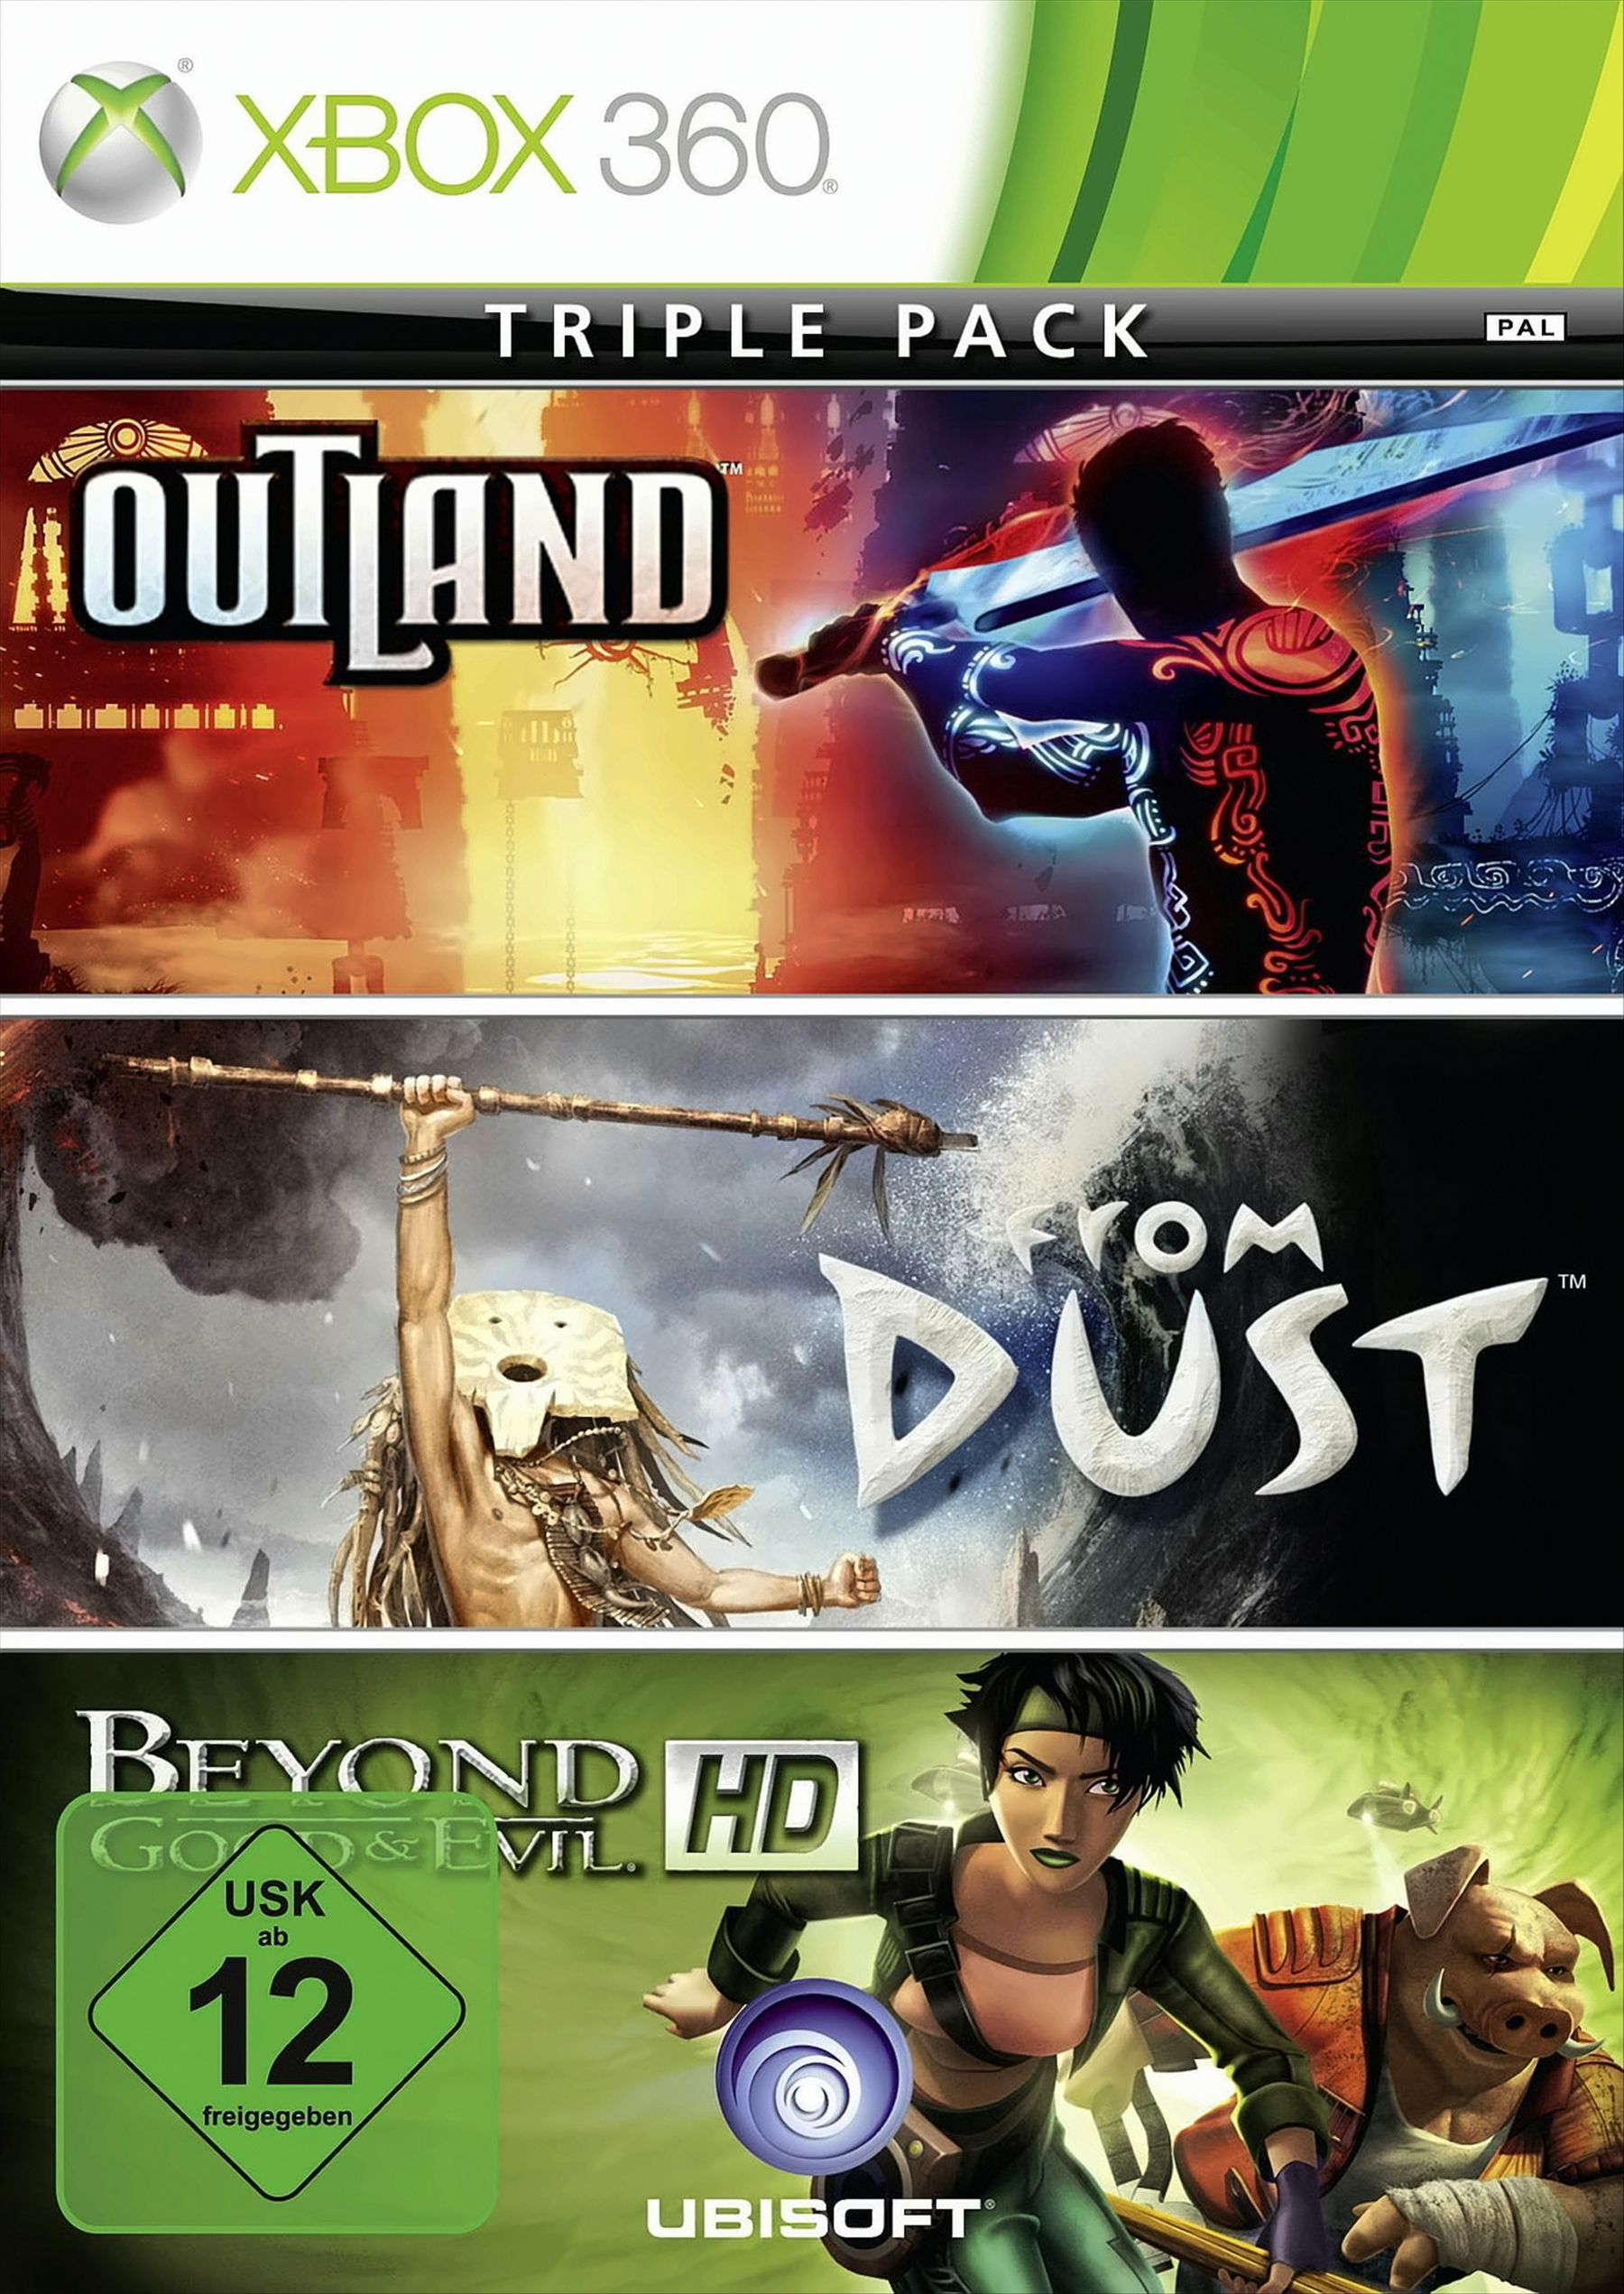 Xbox 360 Beyond & Pack: Outland Evil HD - From 360] / / [Xbox Good Dust Triple